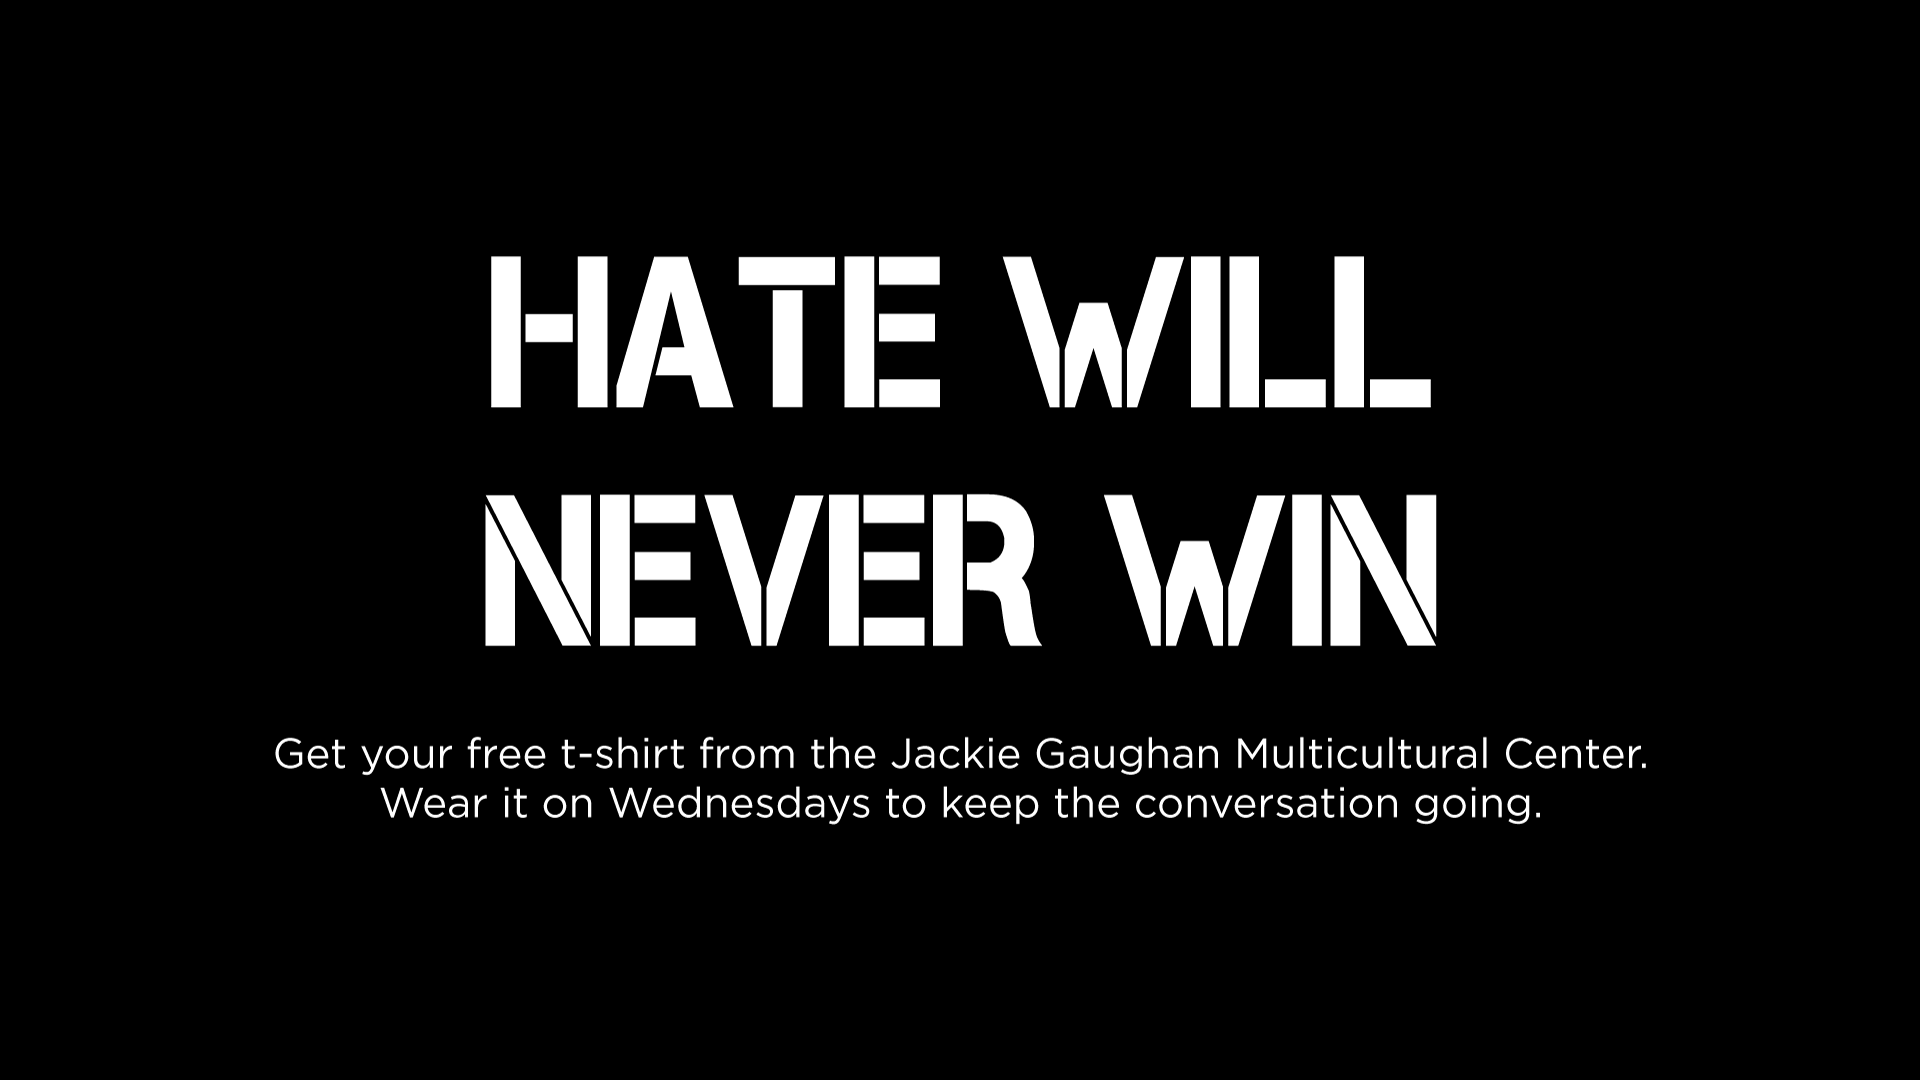 Free t-shirts available at the Jackie Gaughan Mulitcultural Center.